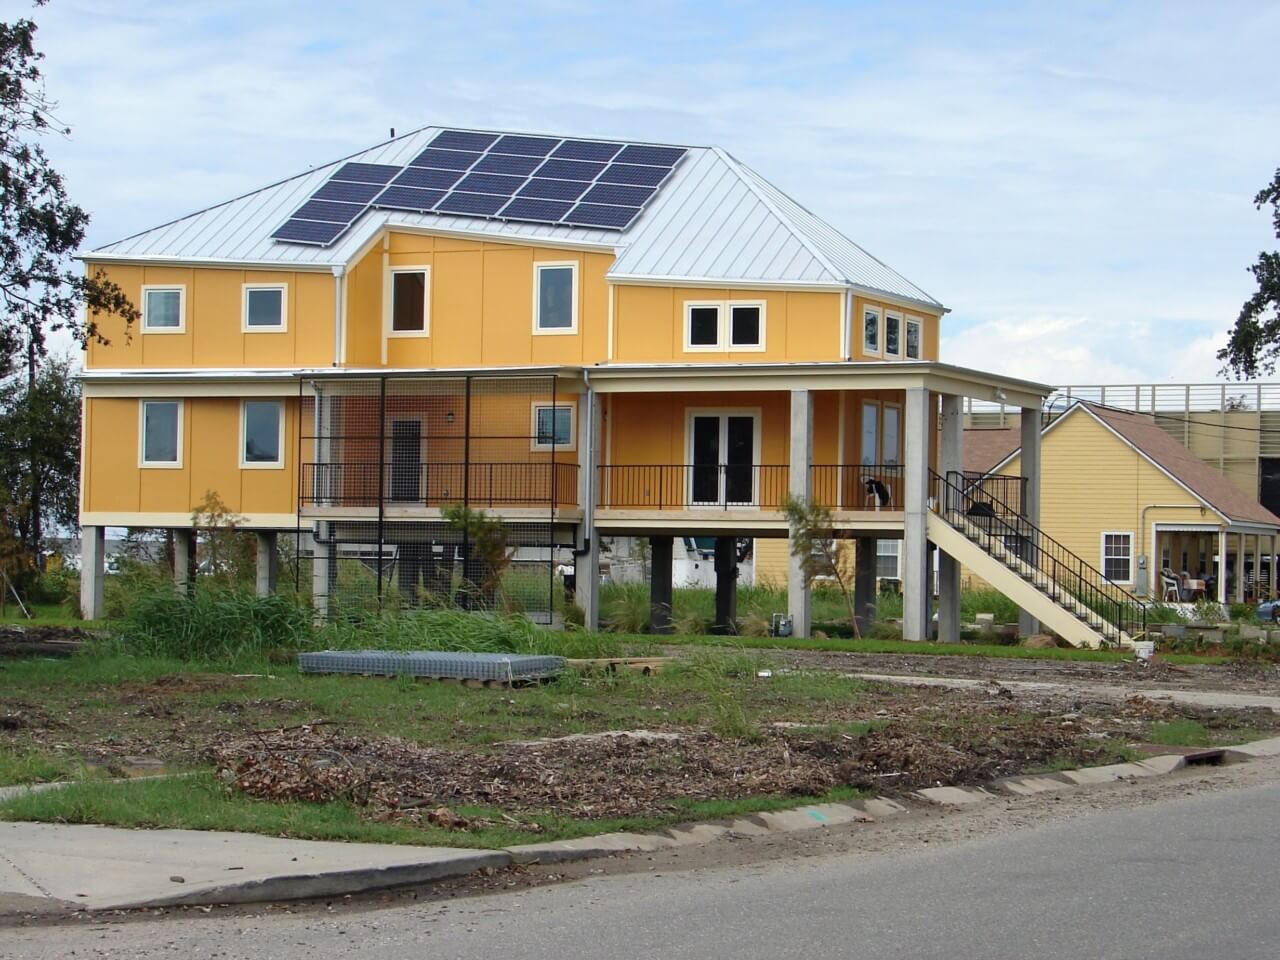 an elevated home with askew solar panels